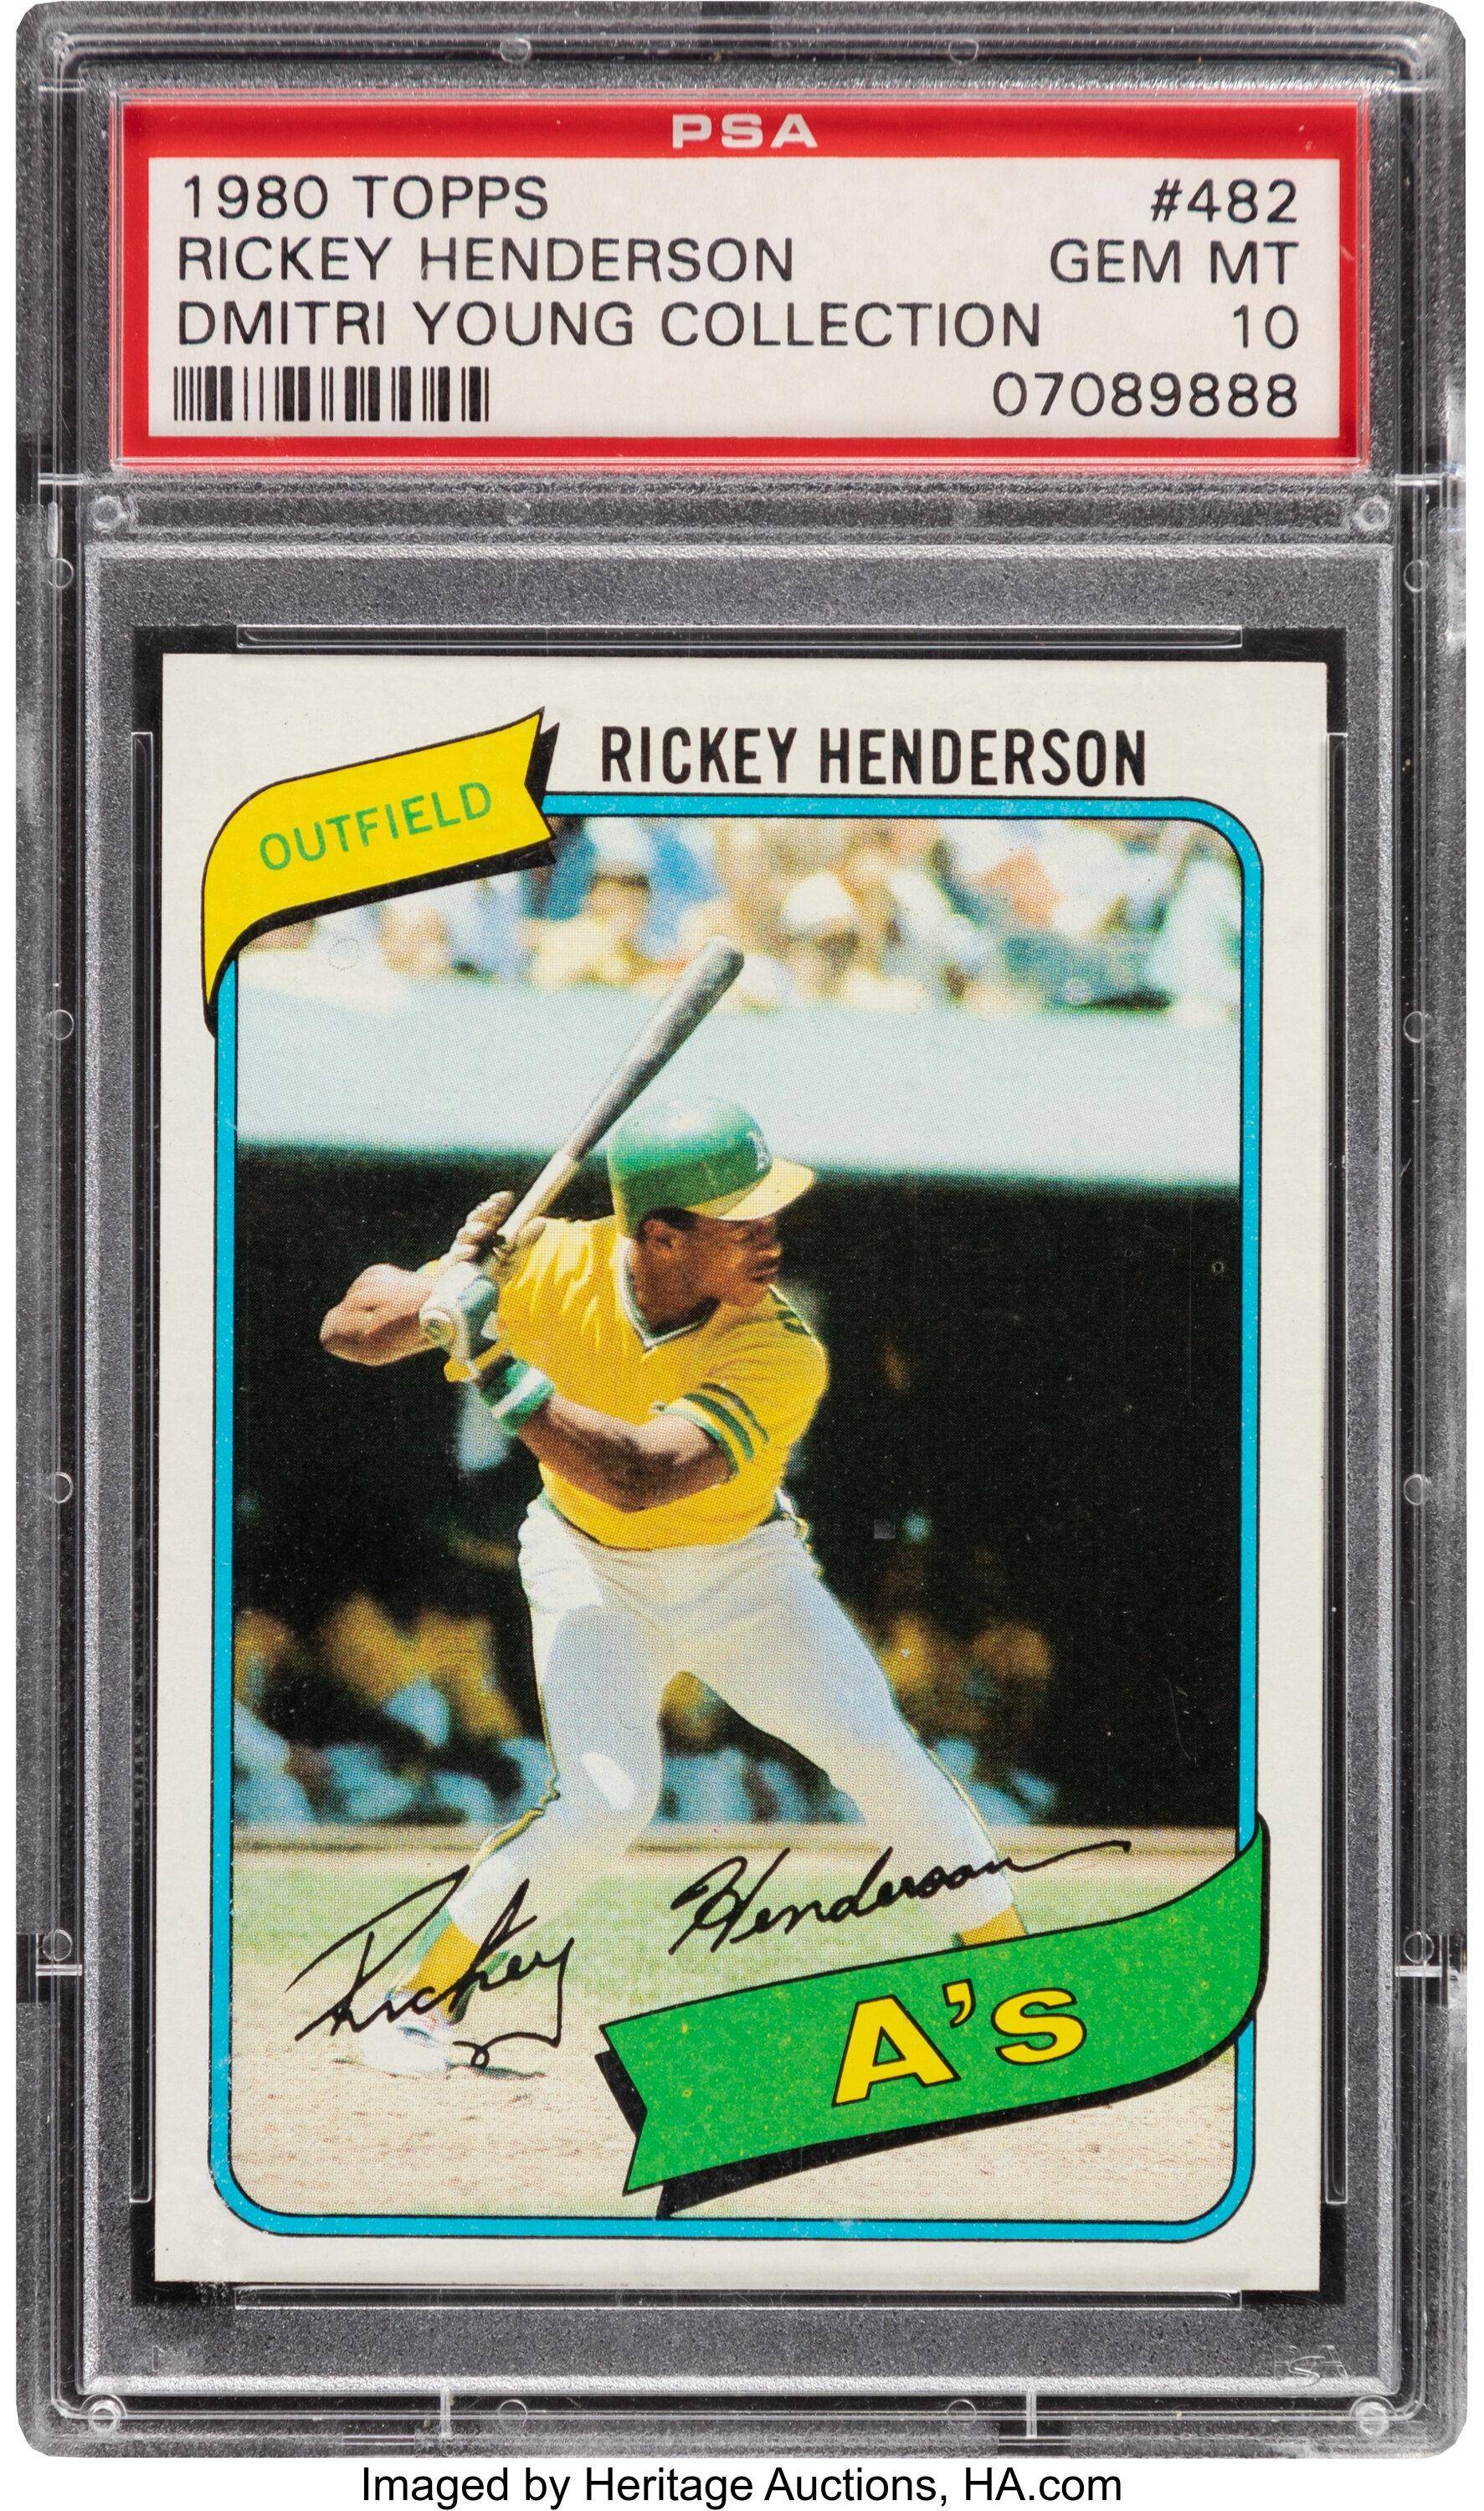 Framed Autographed/Signed Rickey Henderson 33x42 White Baseball